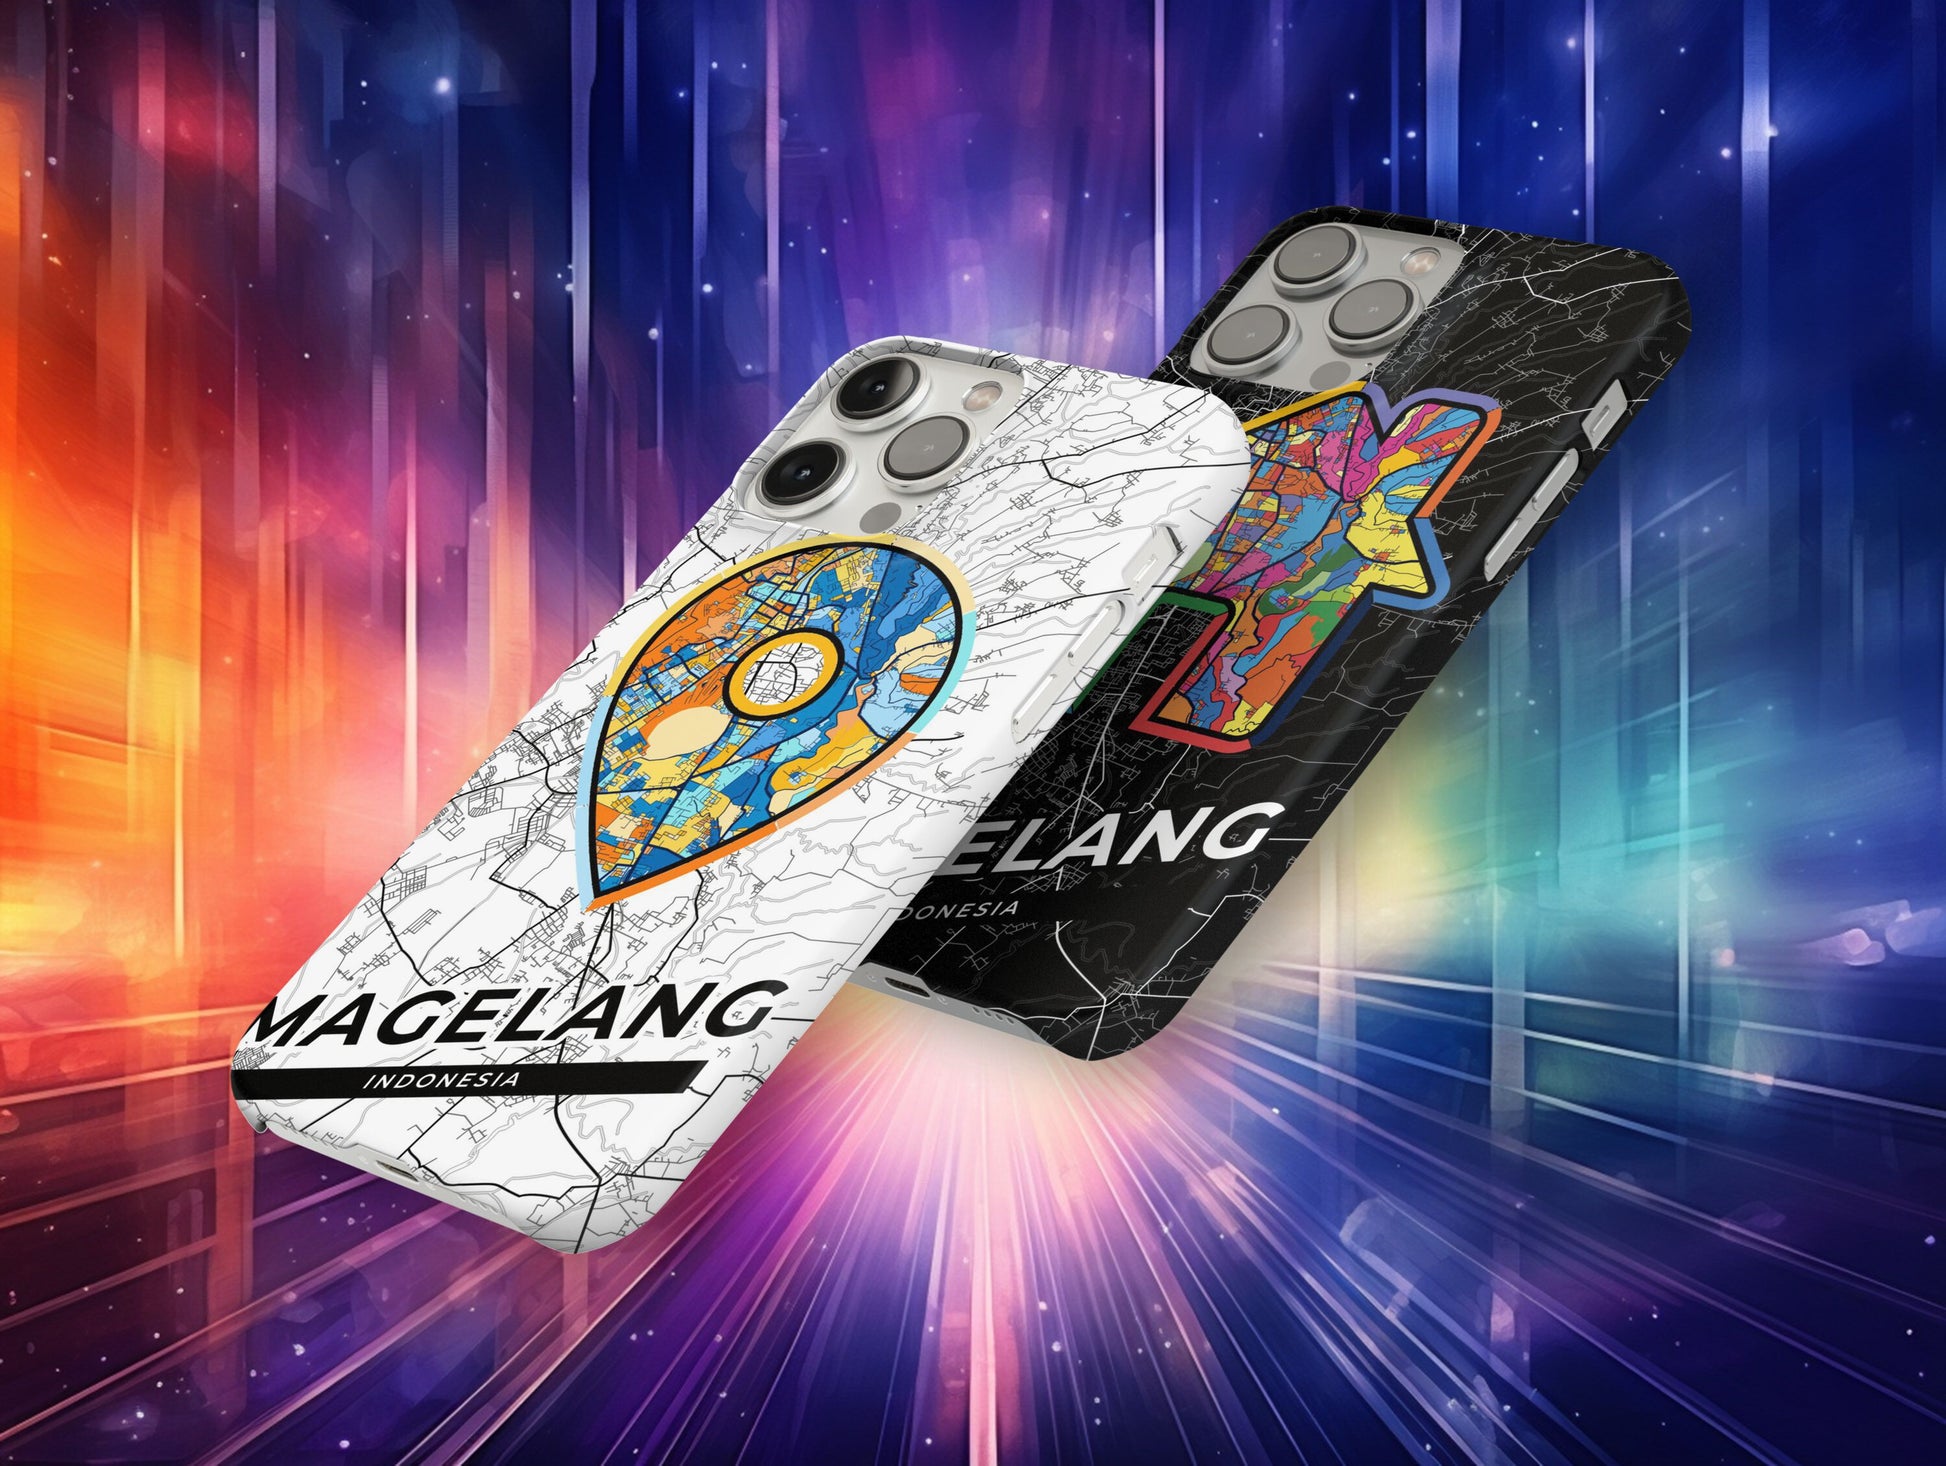 Magelang Indonesia slim phone case with colorful icon. Birthday, wedding or housewarming gift. Couple match cases.